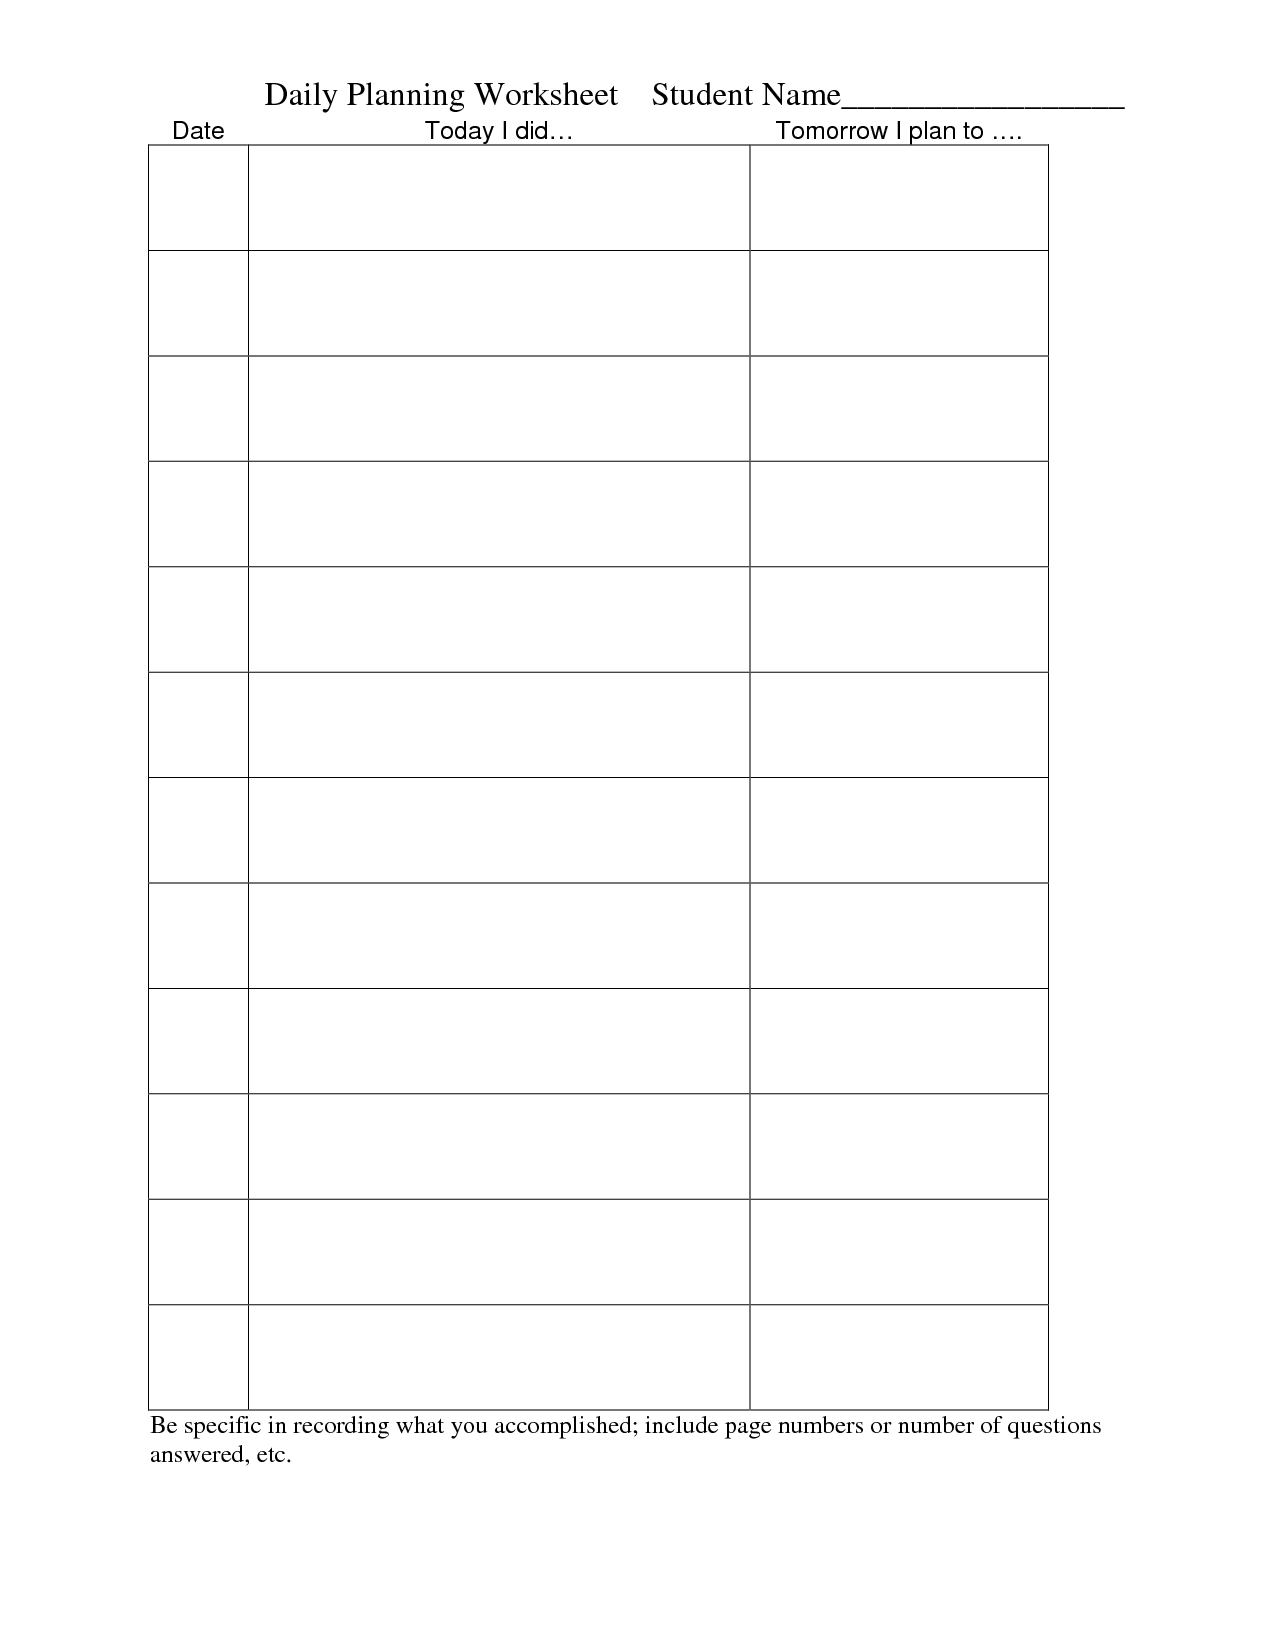 Daily Planning Worksheets Image